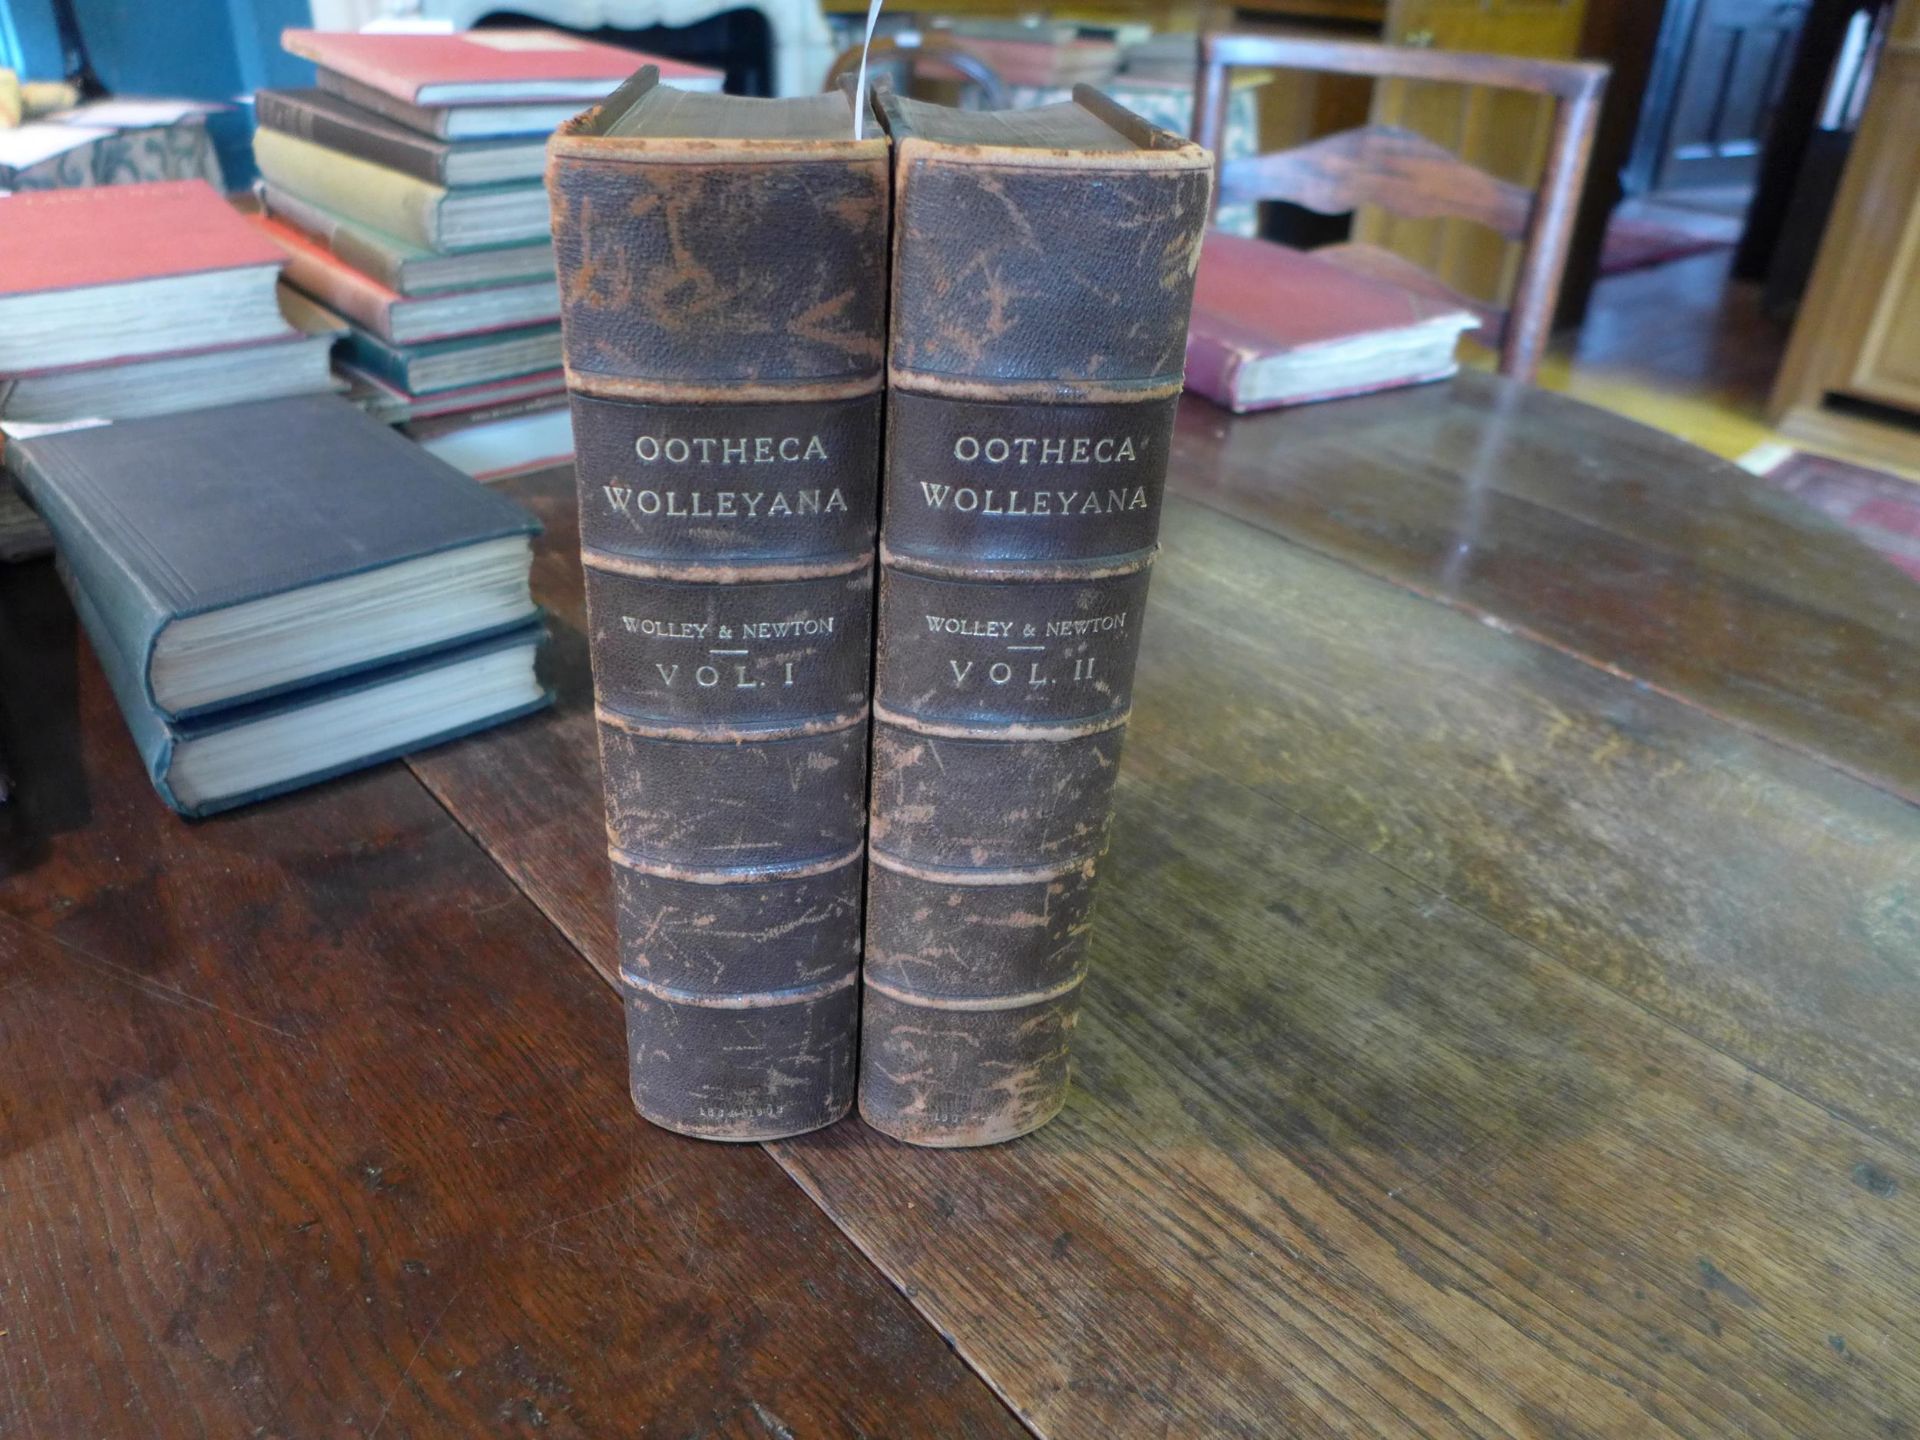 JOHN WOLLEY 'OOTHECA WOLLYANA', AN ILLUSTRATED CATALOGUE, IN TWO VOLUMES, LONDON 1864-1902